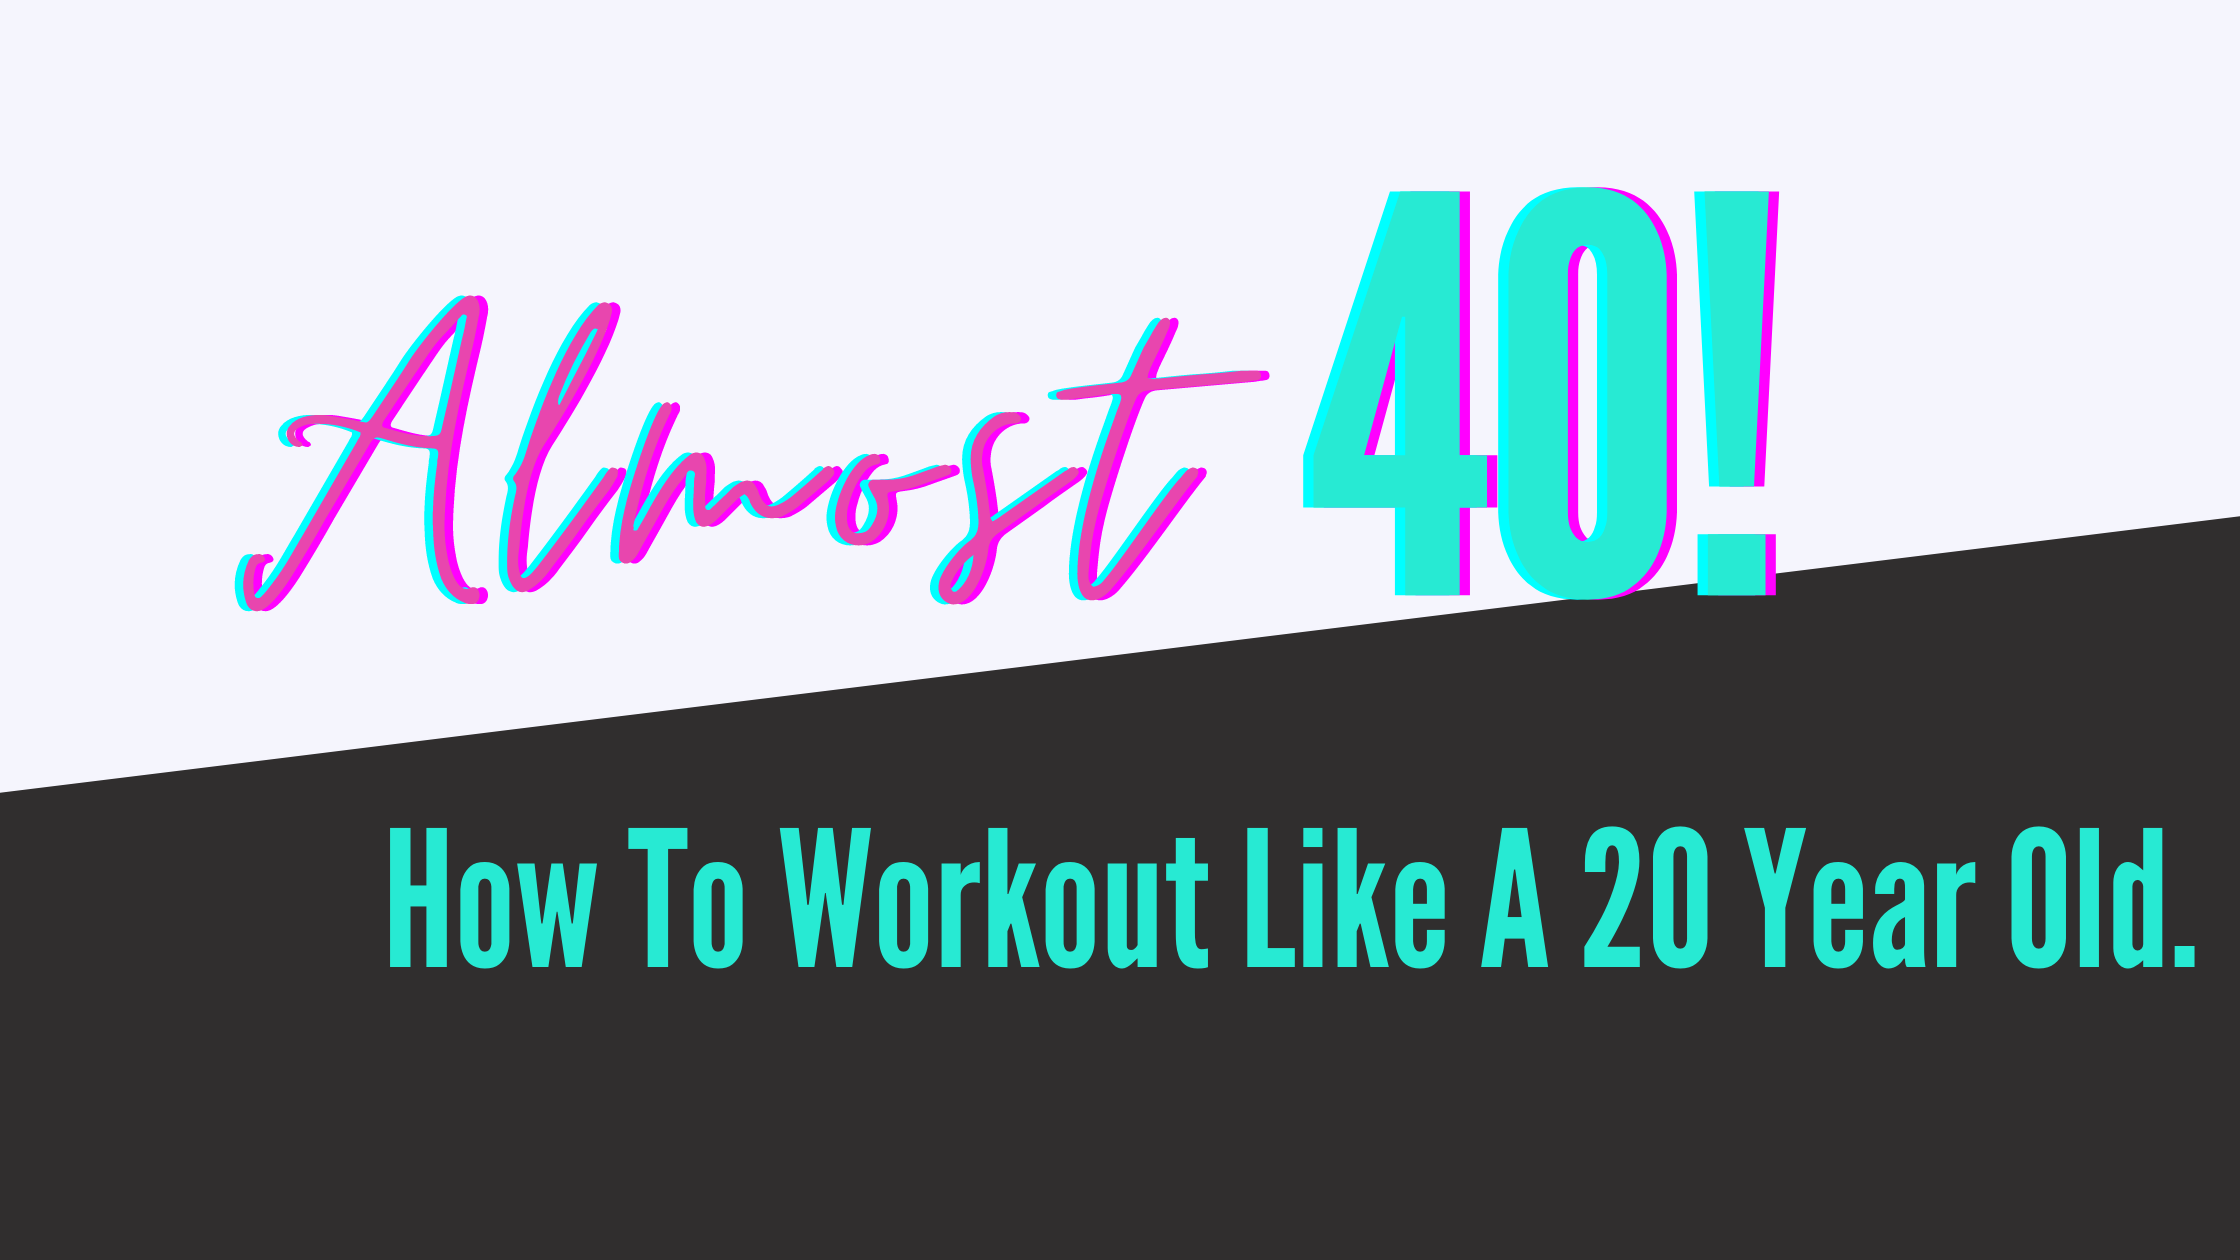 Almost 40! How to Workout Like A 20 year old.